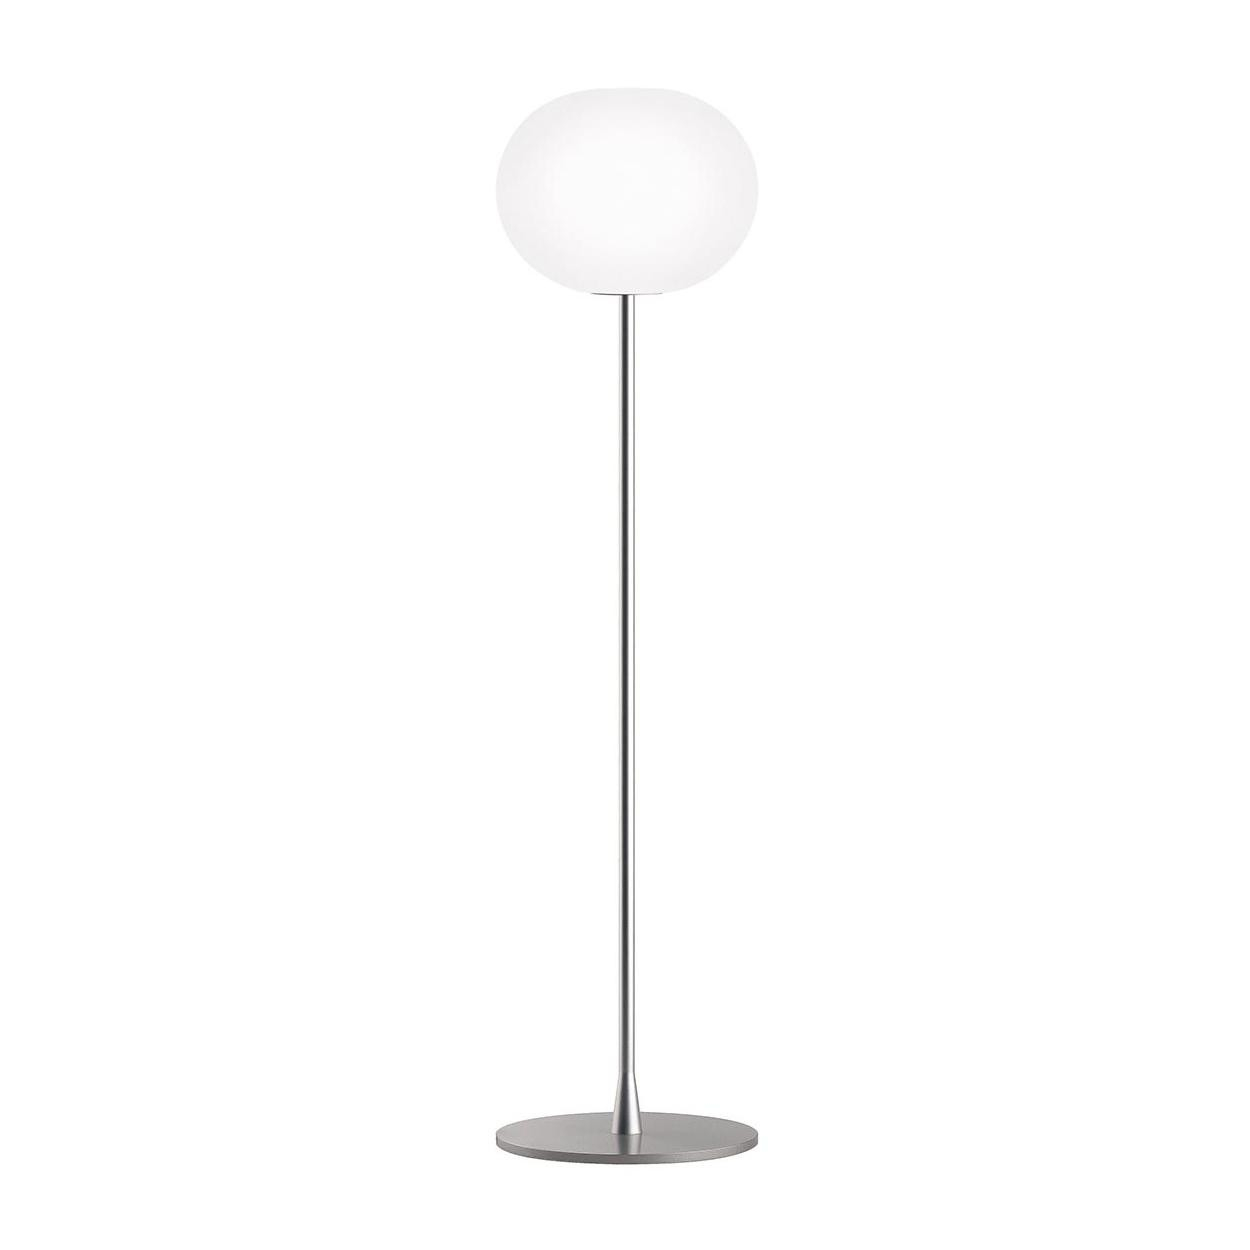 Glo Ball F1 Floor Lamp throughout size 1250 X 1250